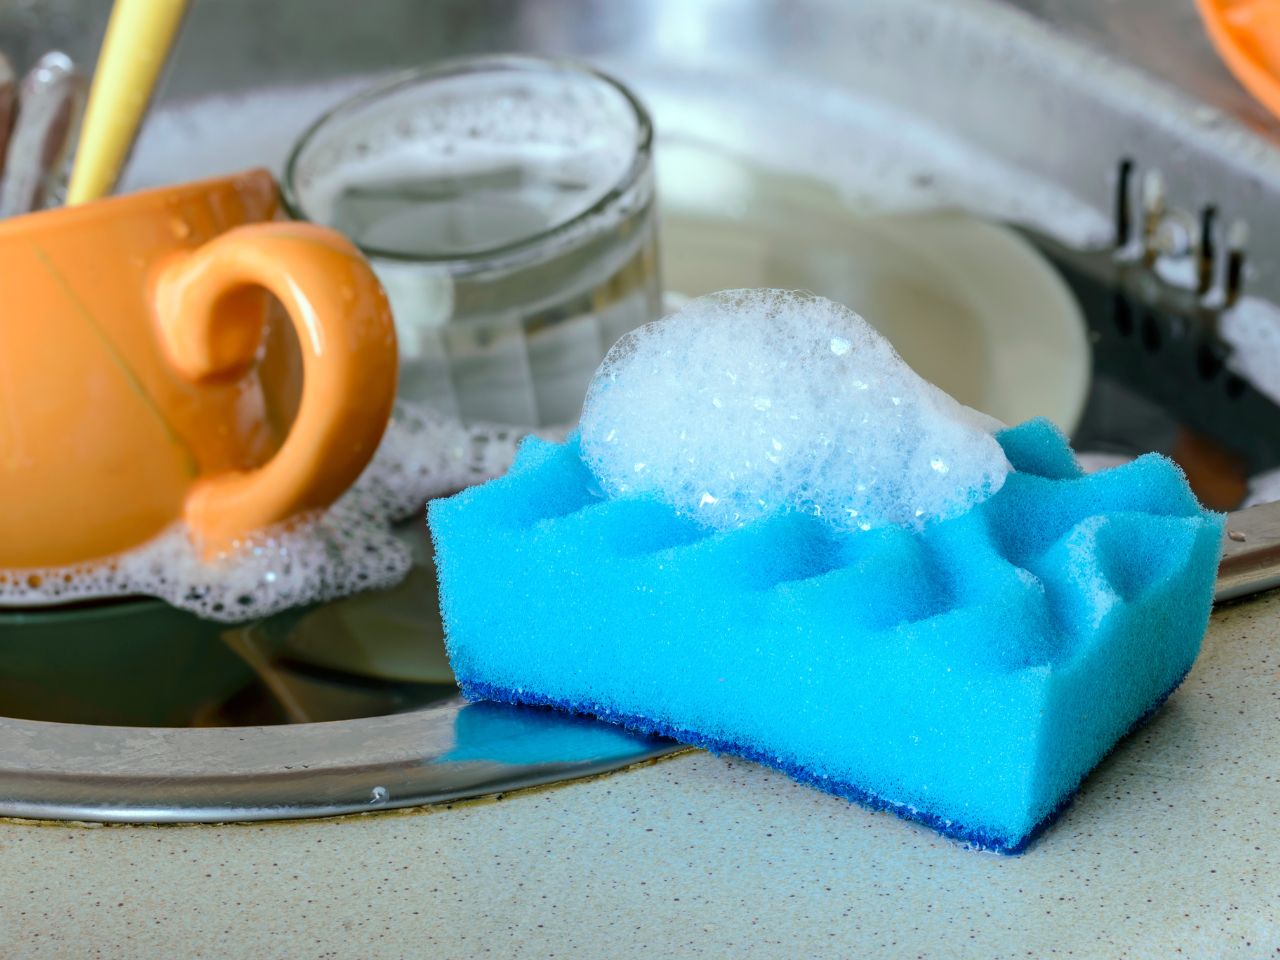 The Smelly Dish Sponge: Causes and Solutions